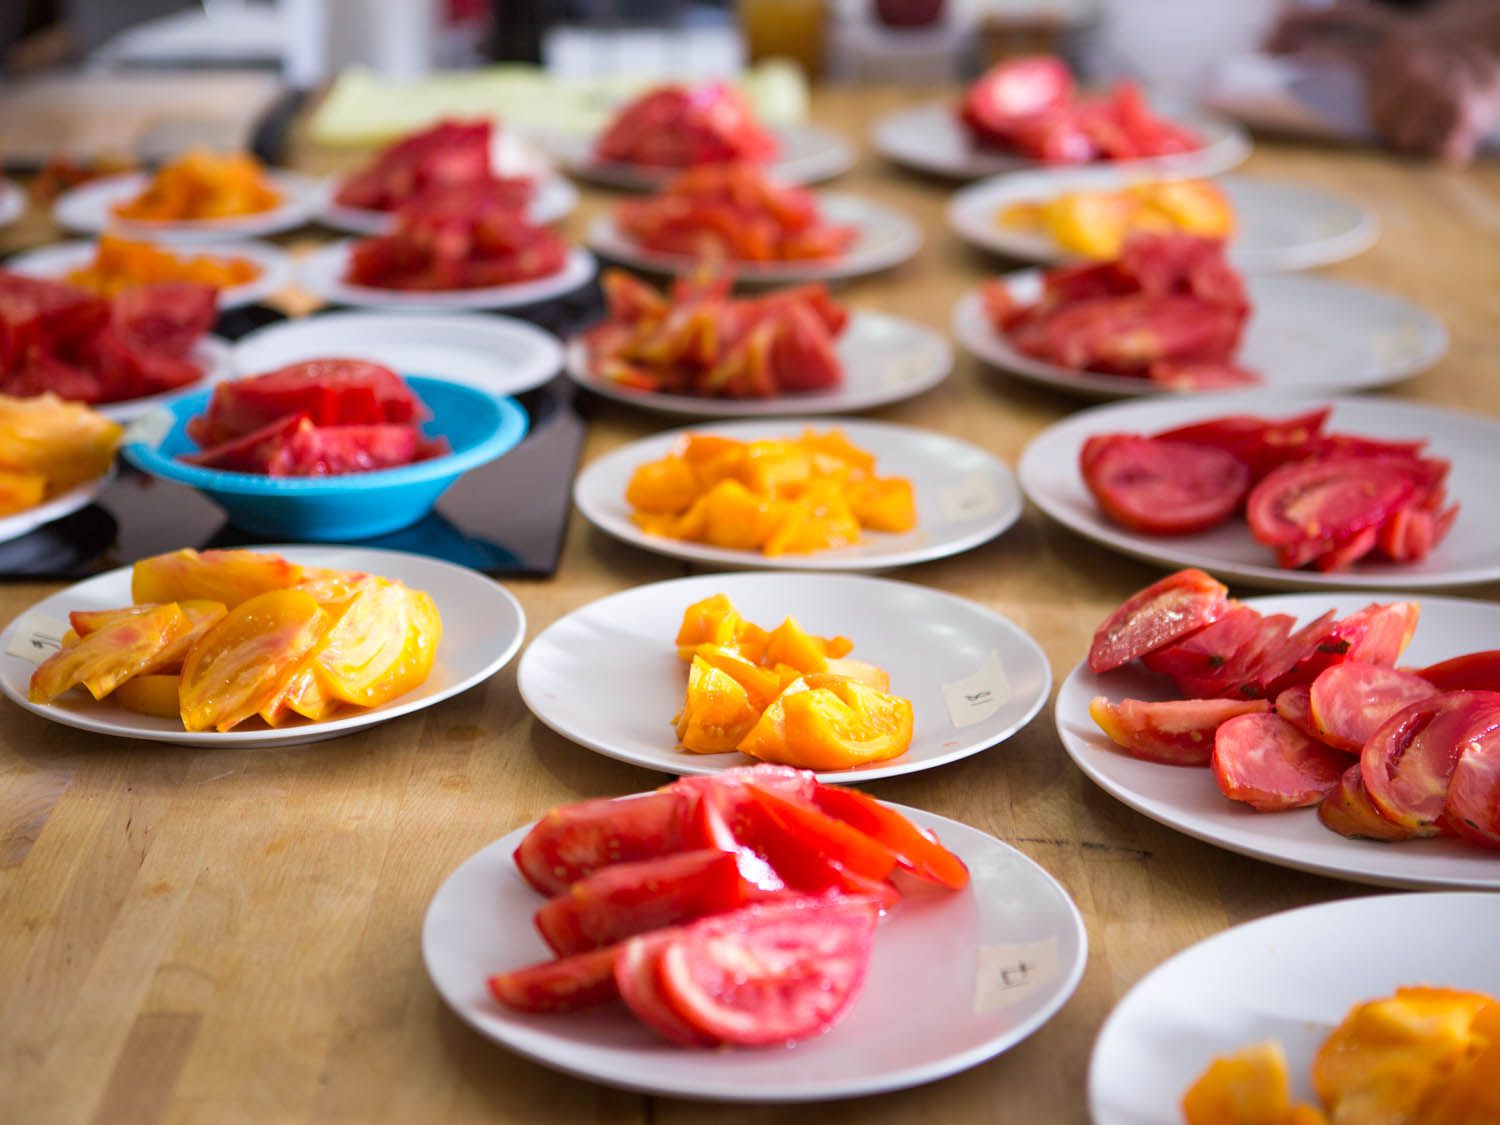 A table full of various tomatoes cut into slices and each cut tomato resting on its own white plate.